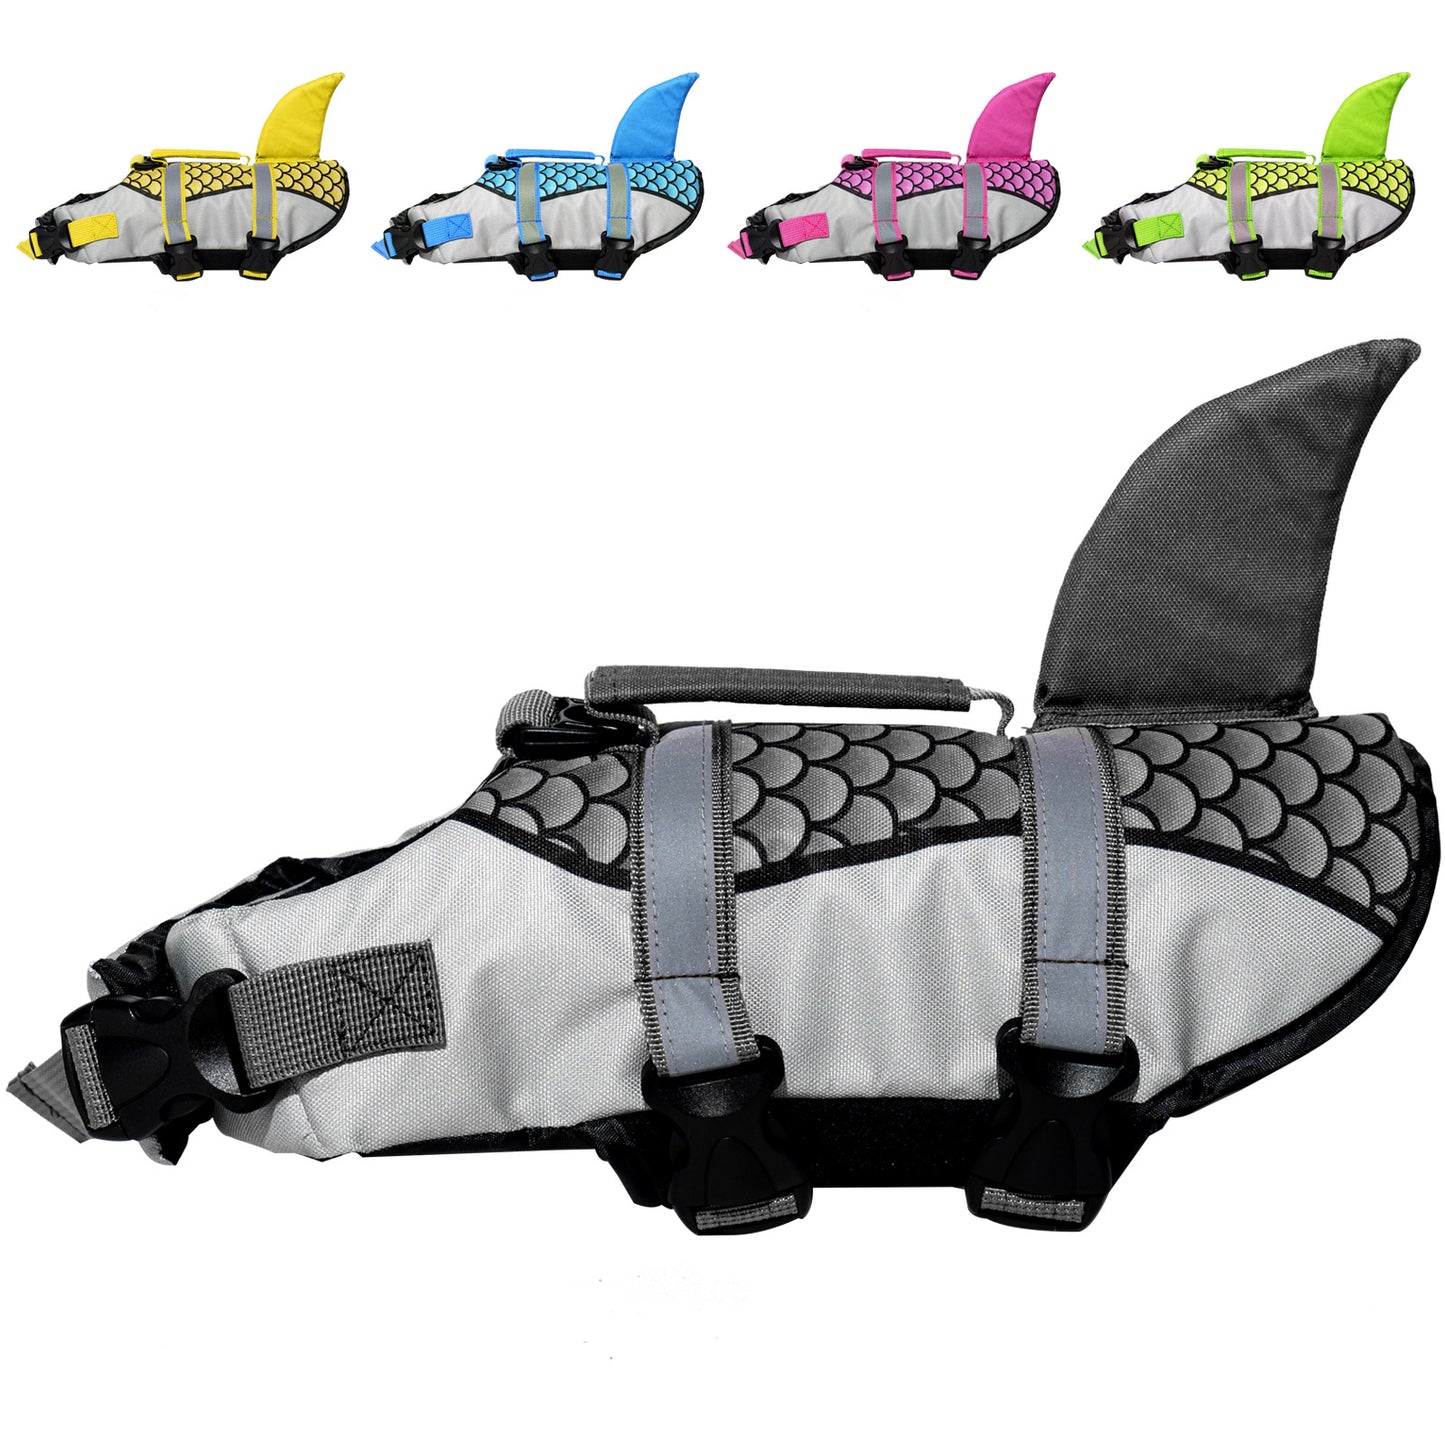 Aiitle Adjustable Shark Dog Life Vest with Rescue Handle Gray